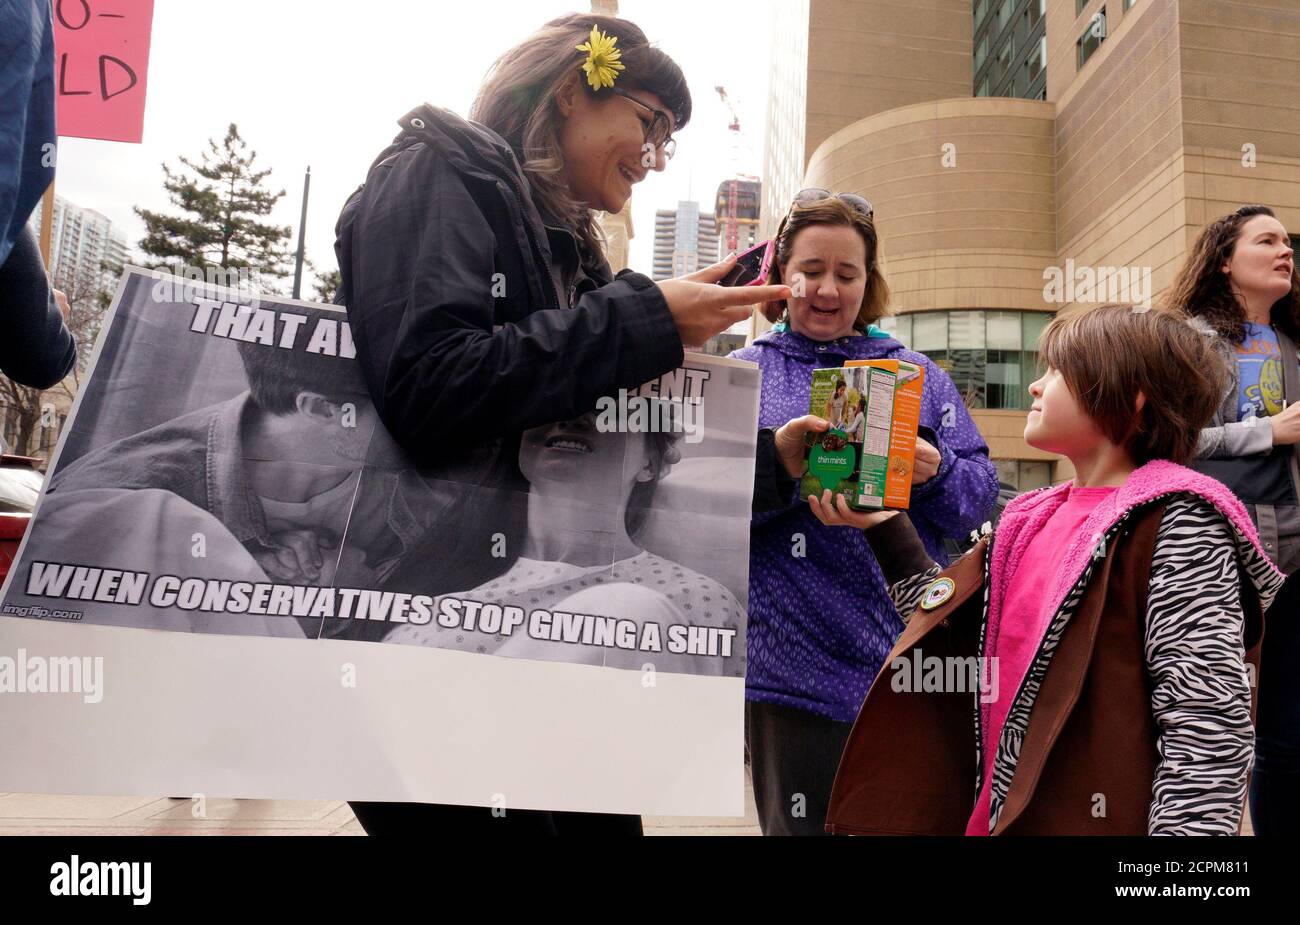 Girl Scout Lucy Bassett (R) sells boxes of Girl Scout cookies to a Planned Parenthood supporter at a protest in downtown Denver, U.S., February 11, 2017. The top of the sign reads, 'That awkward moment'.  REUTERS/Rick Wilking Stock Photo